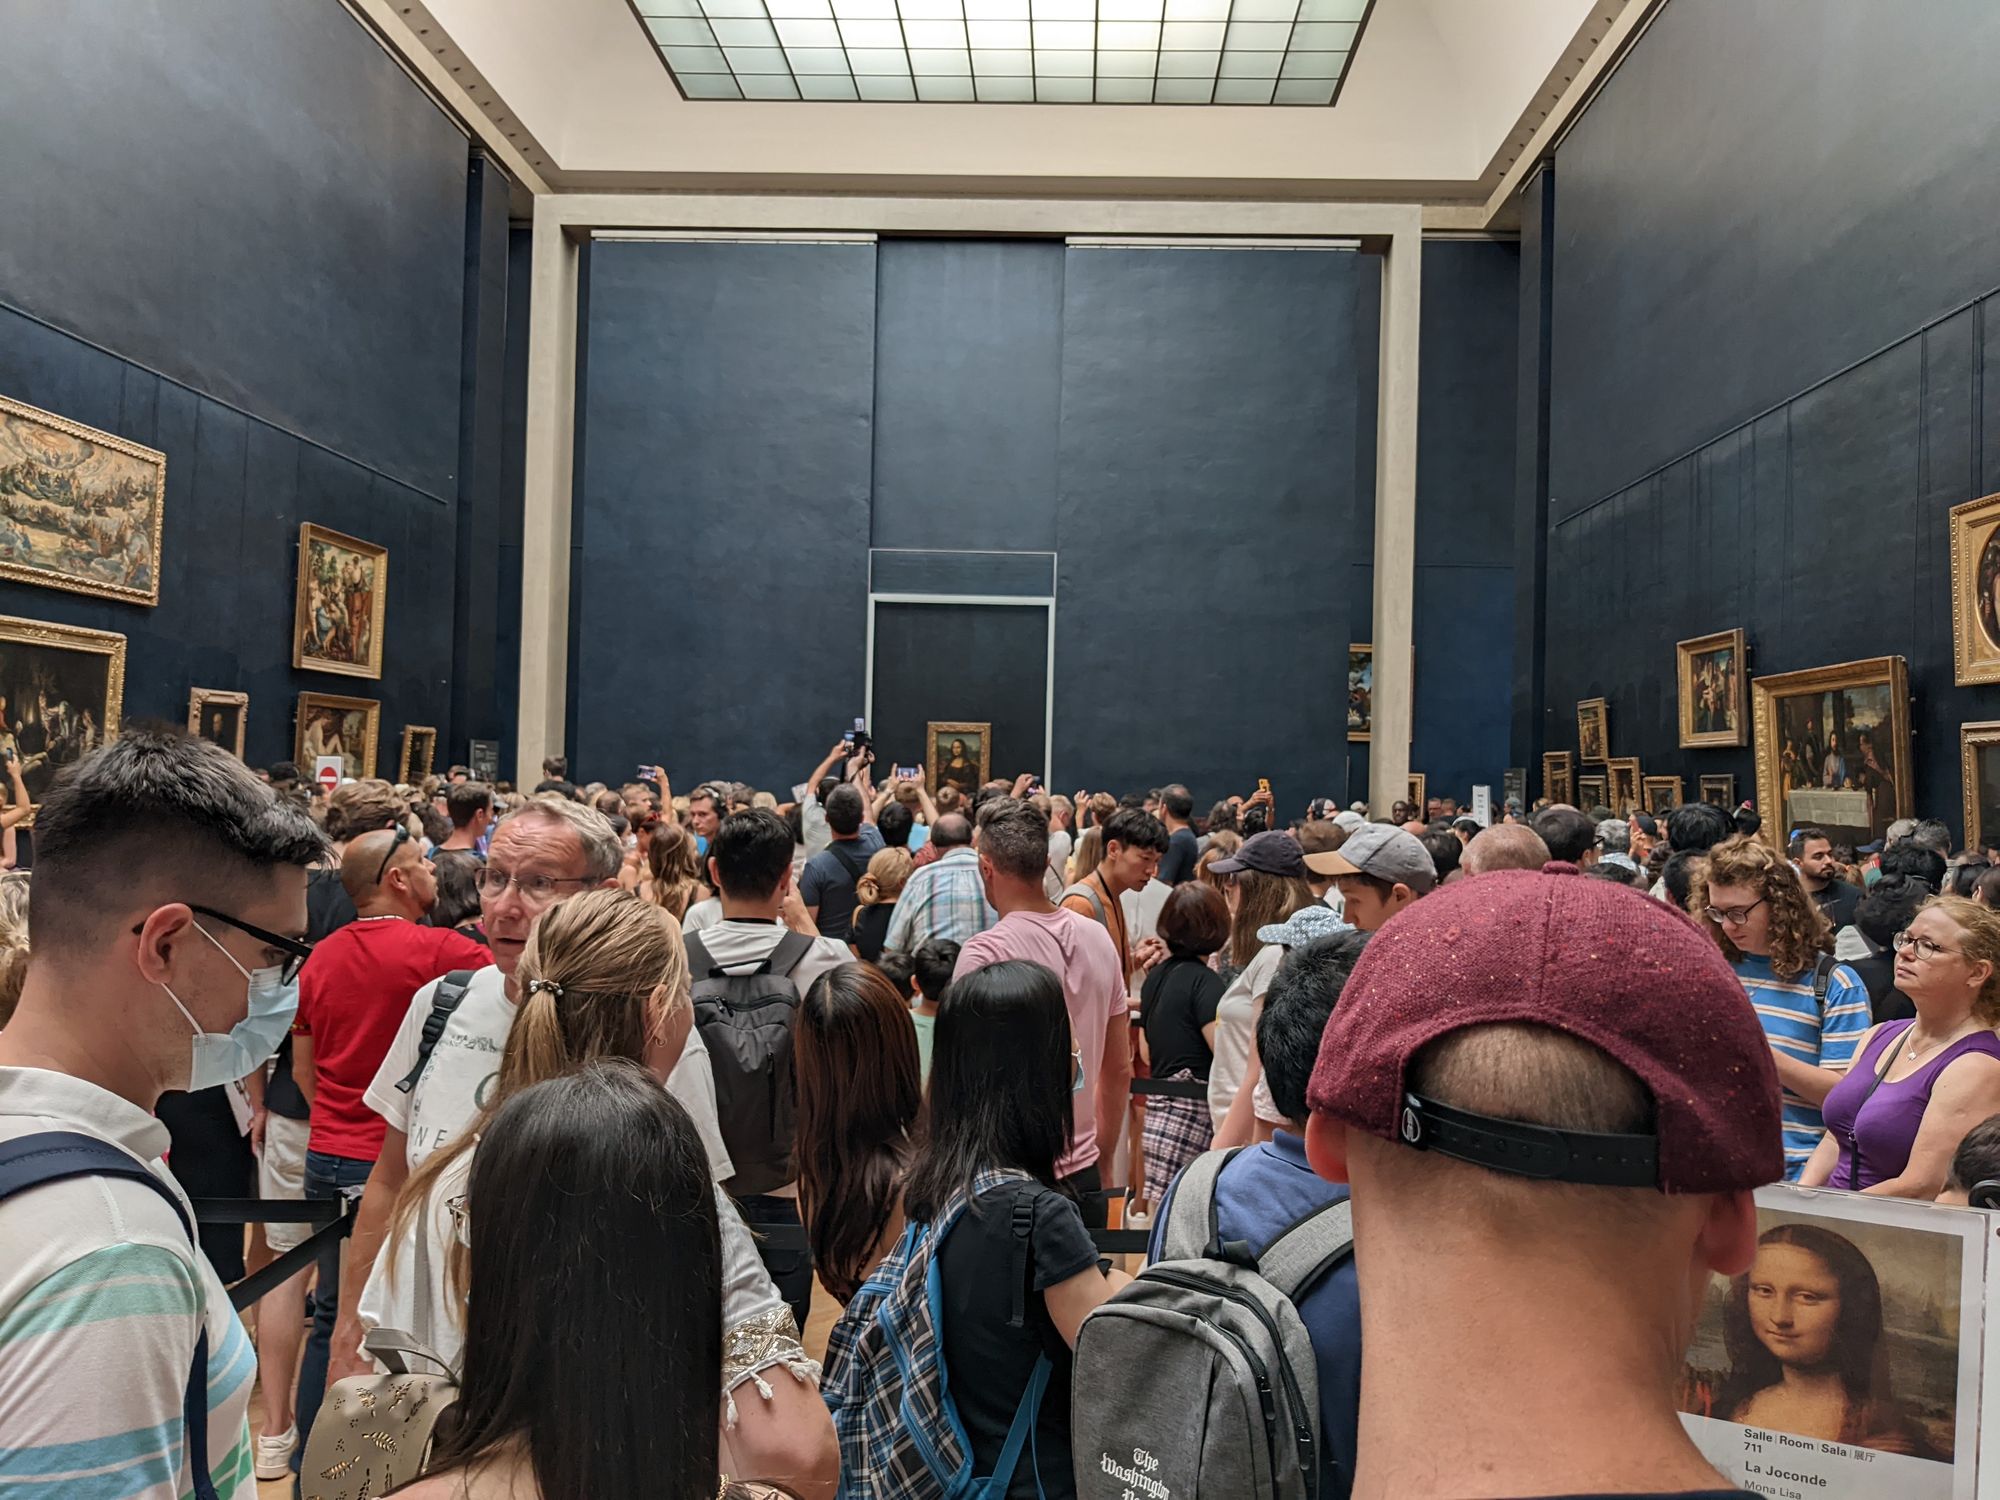 Crowds of people in the Louvre Museum at Paris in front of the Mona Lisa.